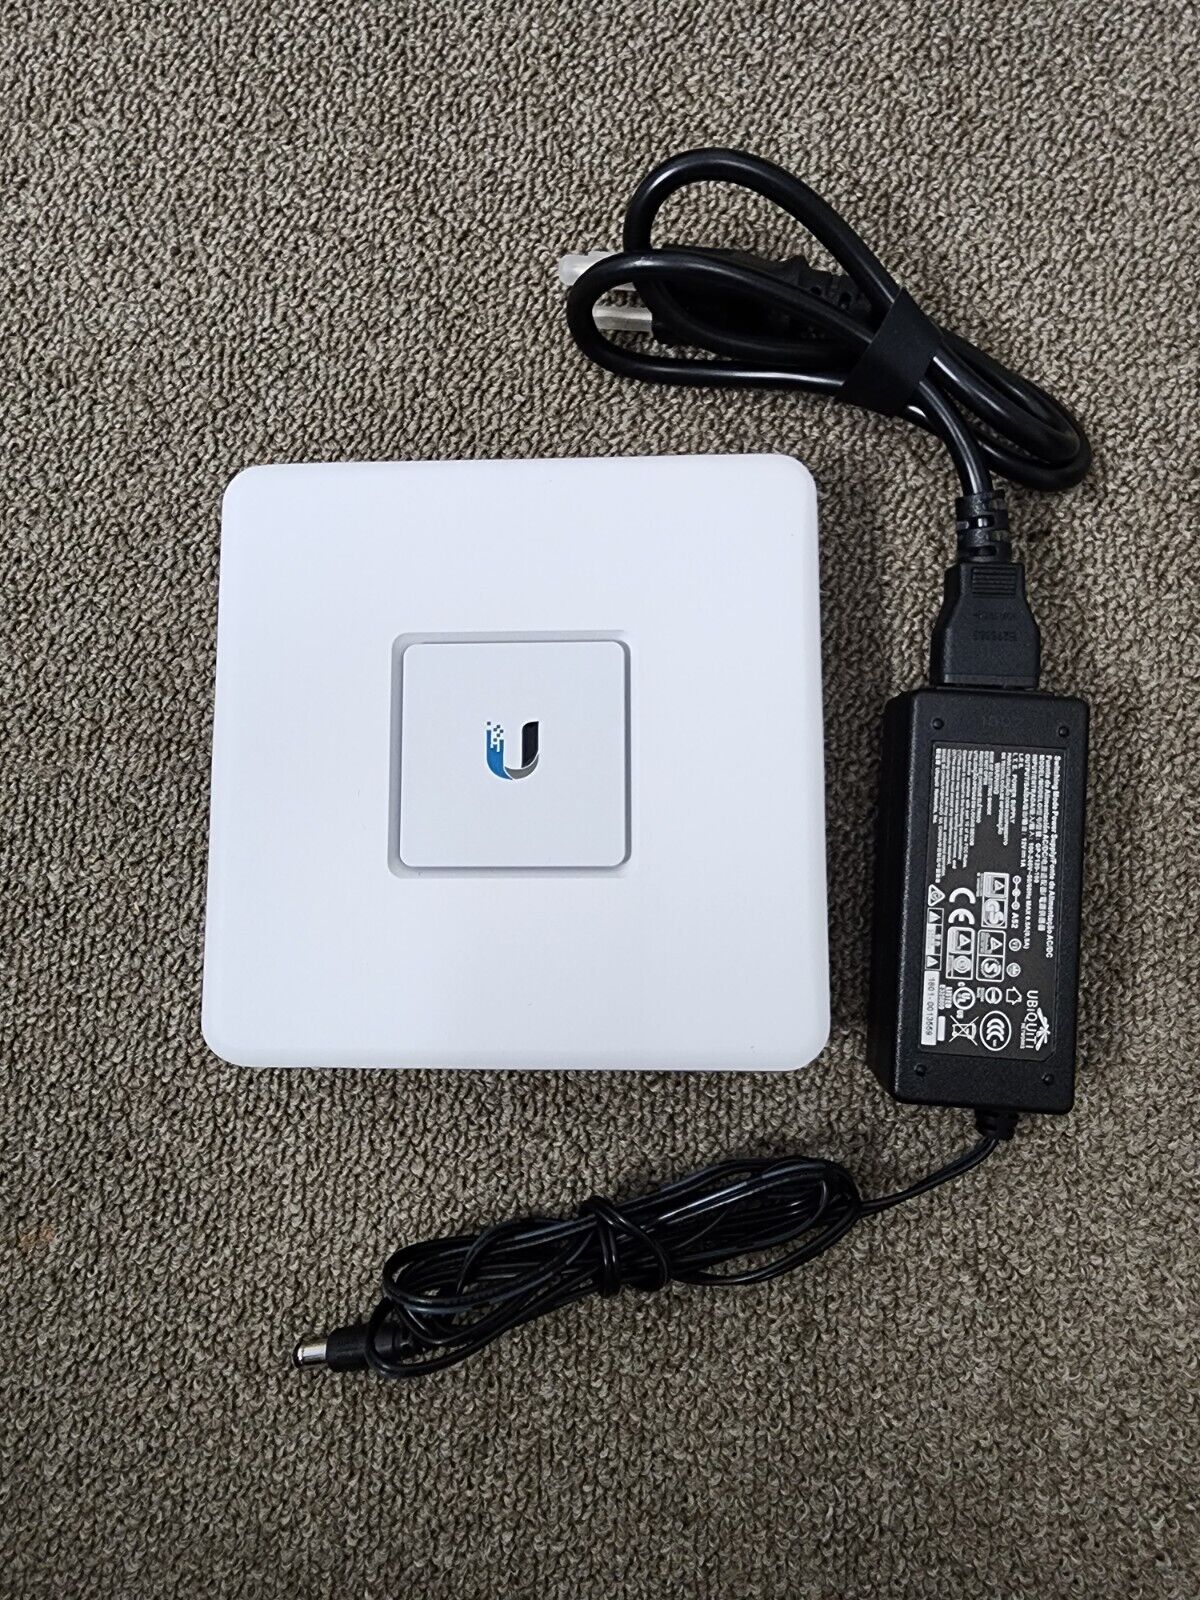 Ubiquiti Networks USG Unifi Security Gateway Router/Firewall ** FAST Shipping **